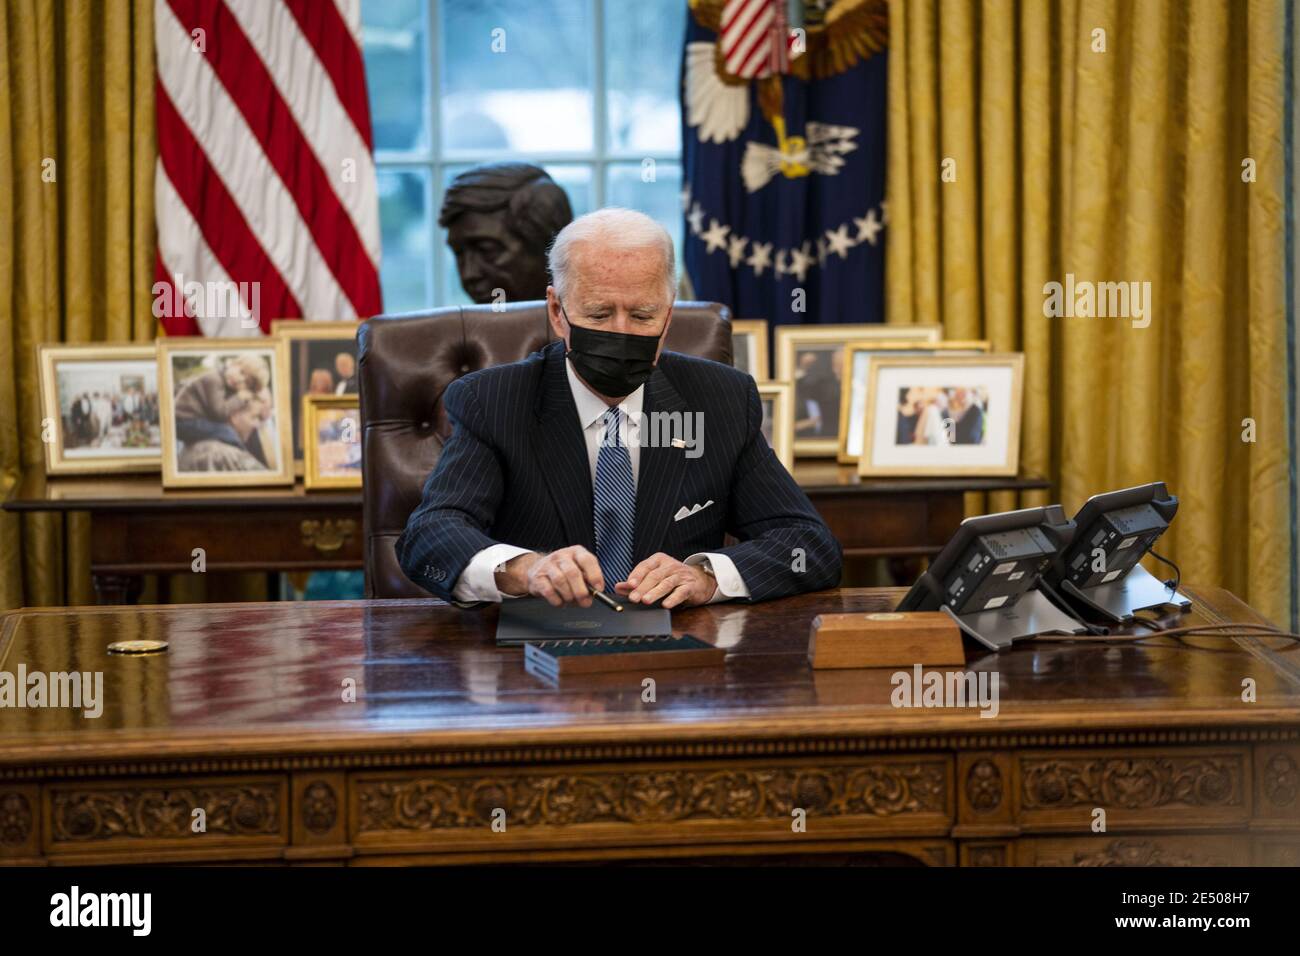 Washington, United States. 25th Jan, 2021. President Joe Biden signs an executive order reversing a Trump era ban on transgender serving in the military, in the Oval Office at the White House, Monday, January 25, 2021in Washington, DC. Pool Photo by Doug Mills/UPI Credit: UPI/Alamy Live News Stock Photo